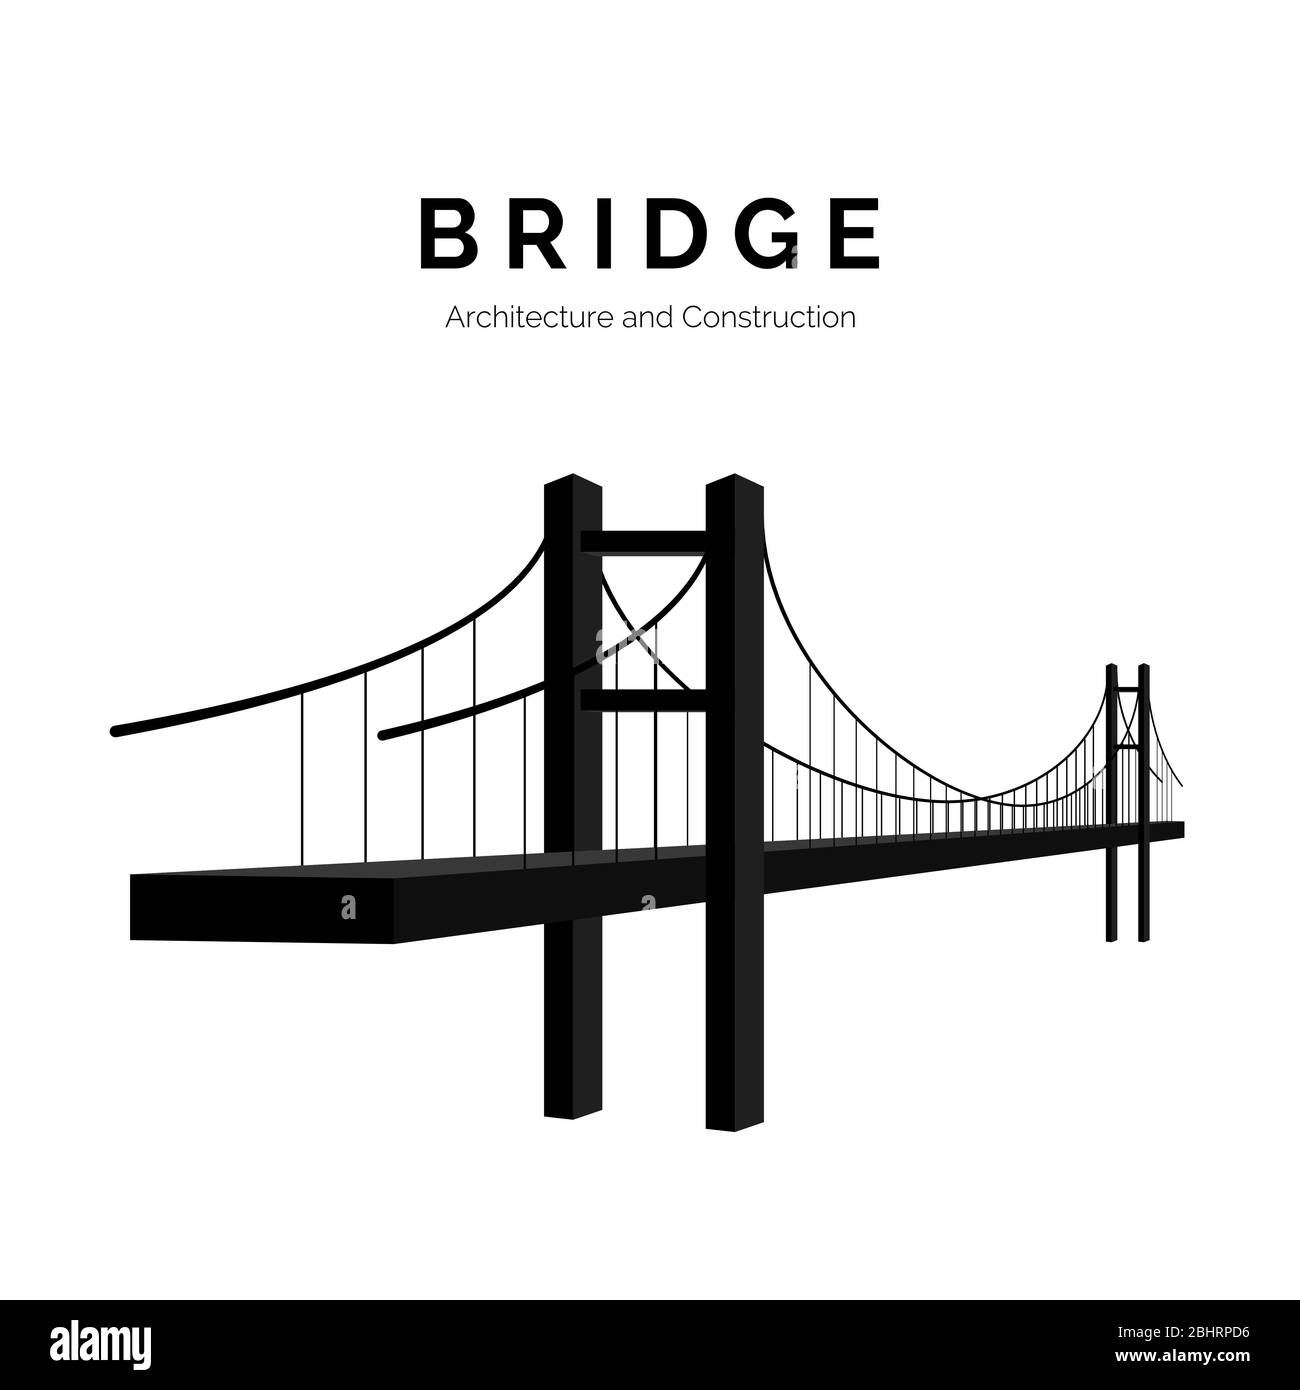 Bridge architecture and constructions. Bridge icon or simple logo. Modern building connection. Vector illustration Stock Vector